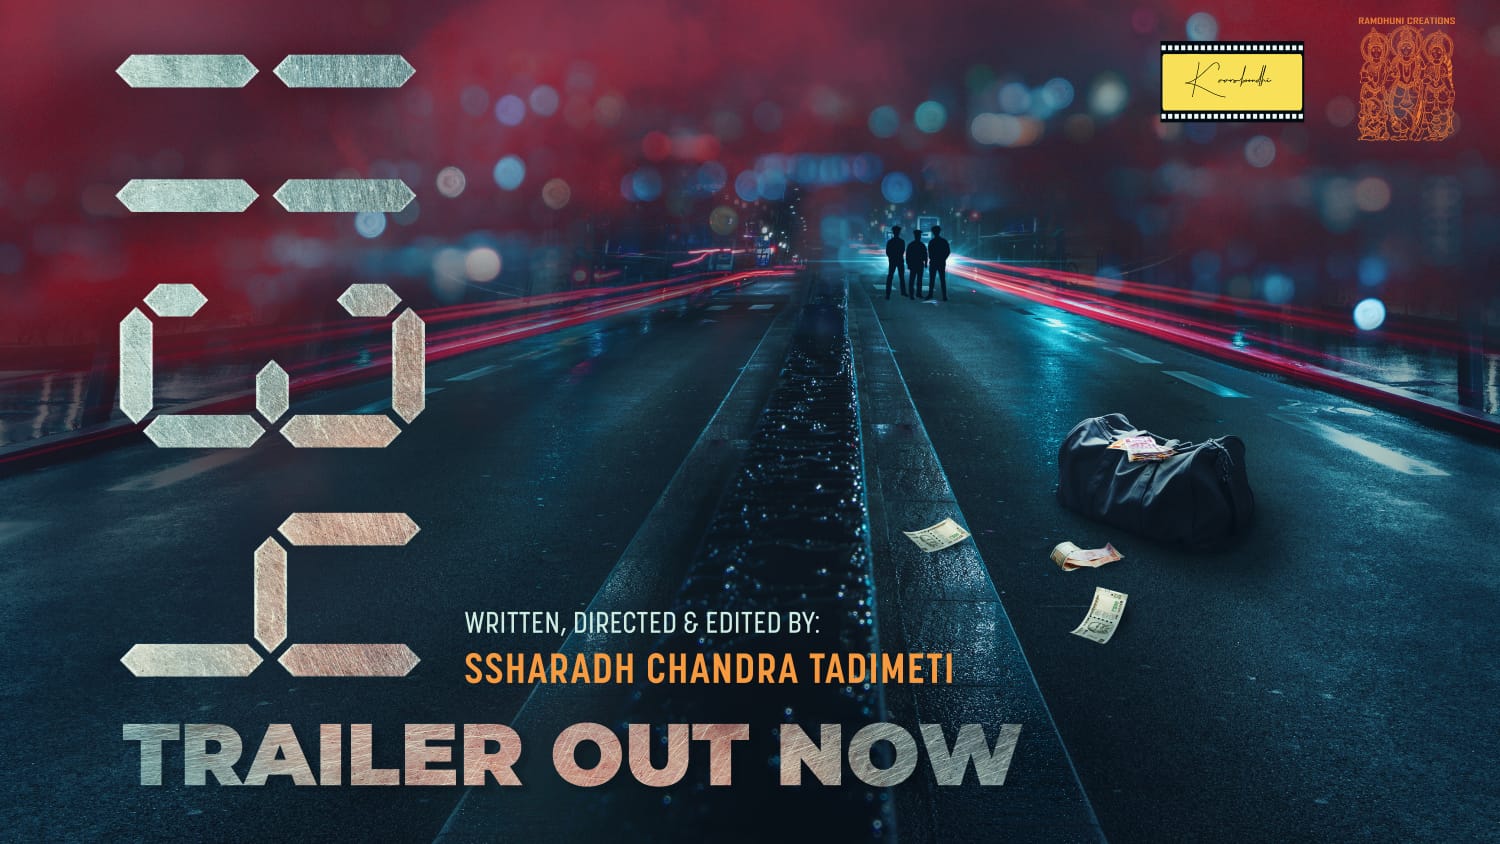 11:34 Trailer Looks Promising With Intriguing Story, Gripping Narration And Top-notch Technicalities